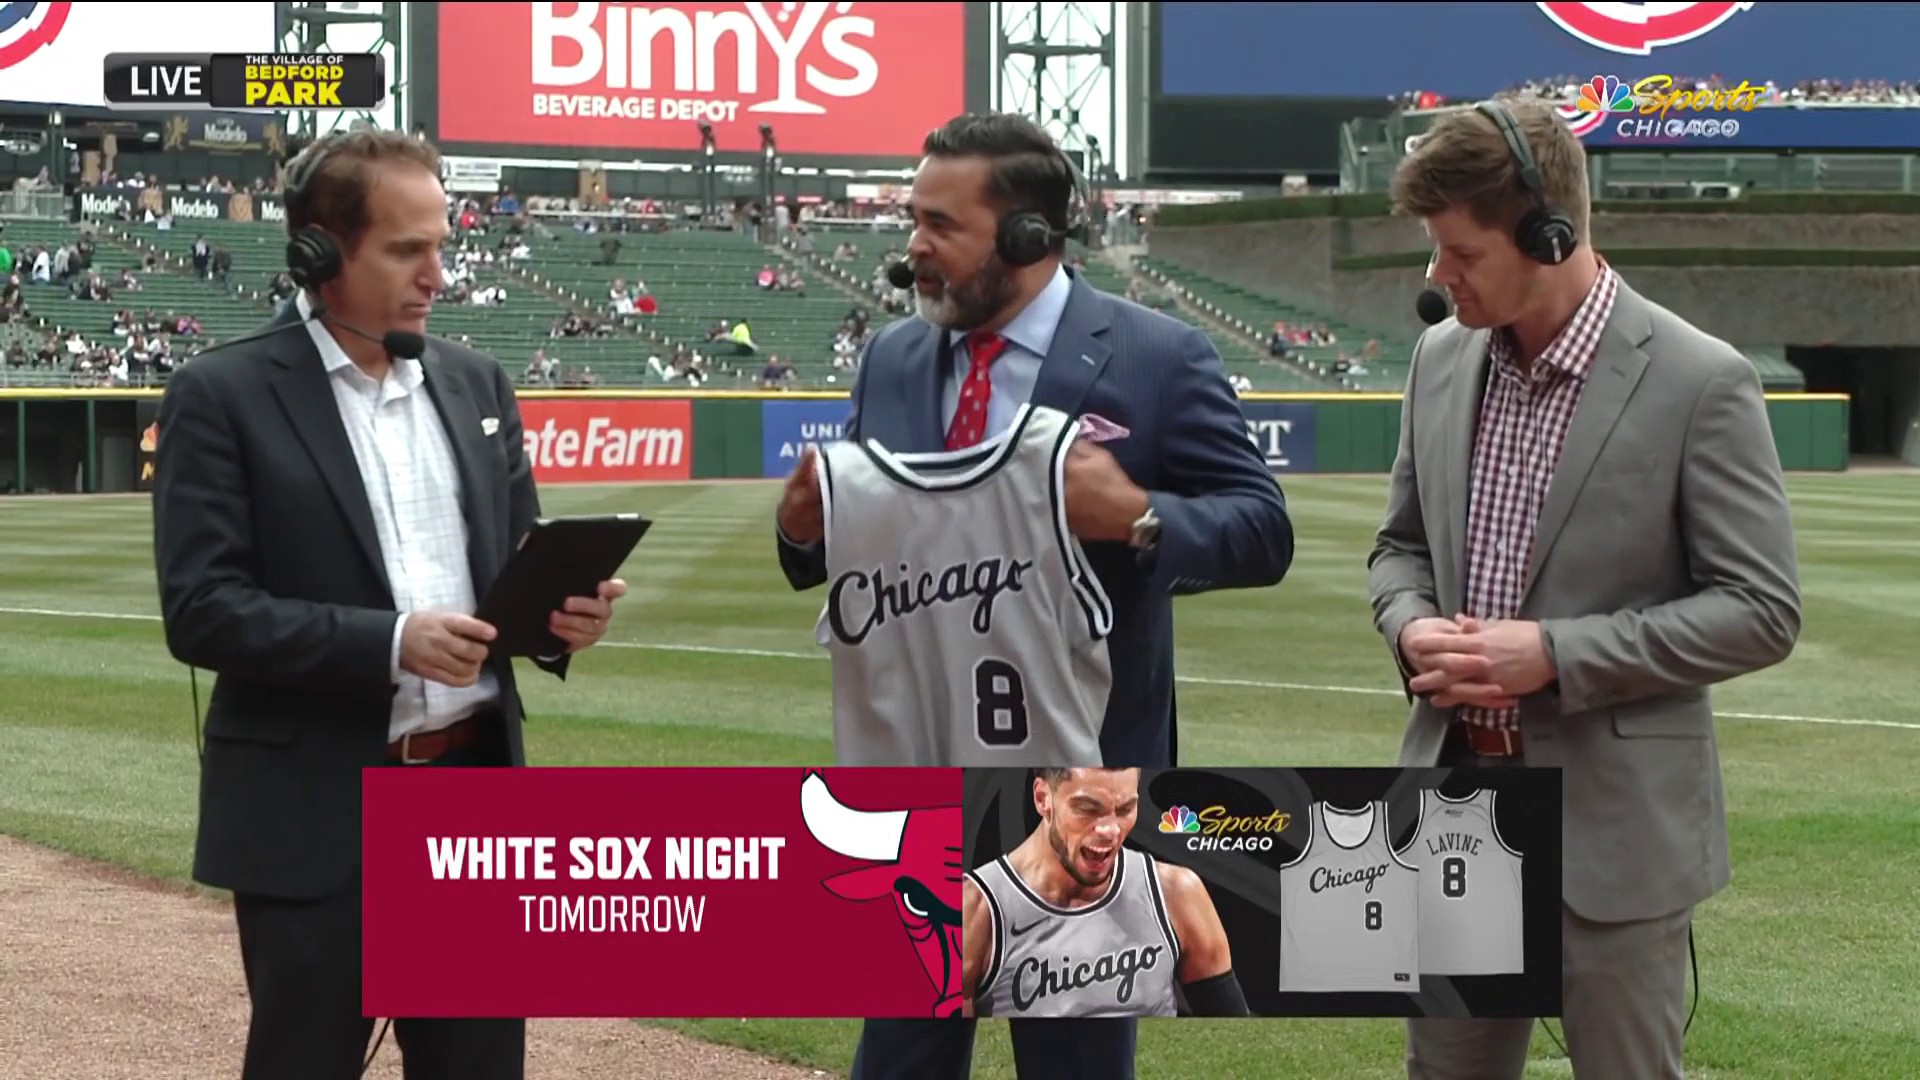 White Sox Talk on X: This would be the filthiest jersey in the NBA  @chicagobulls  / X